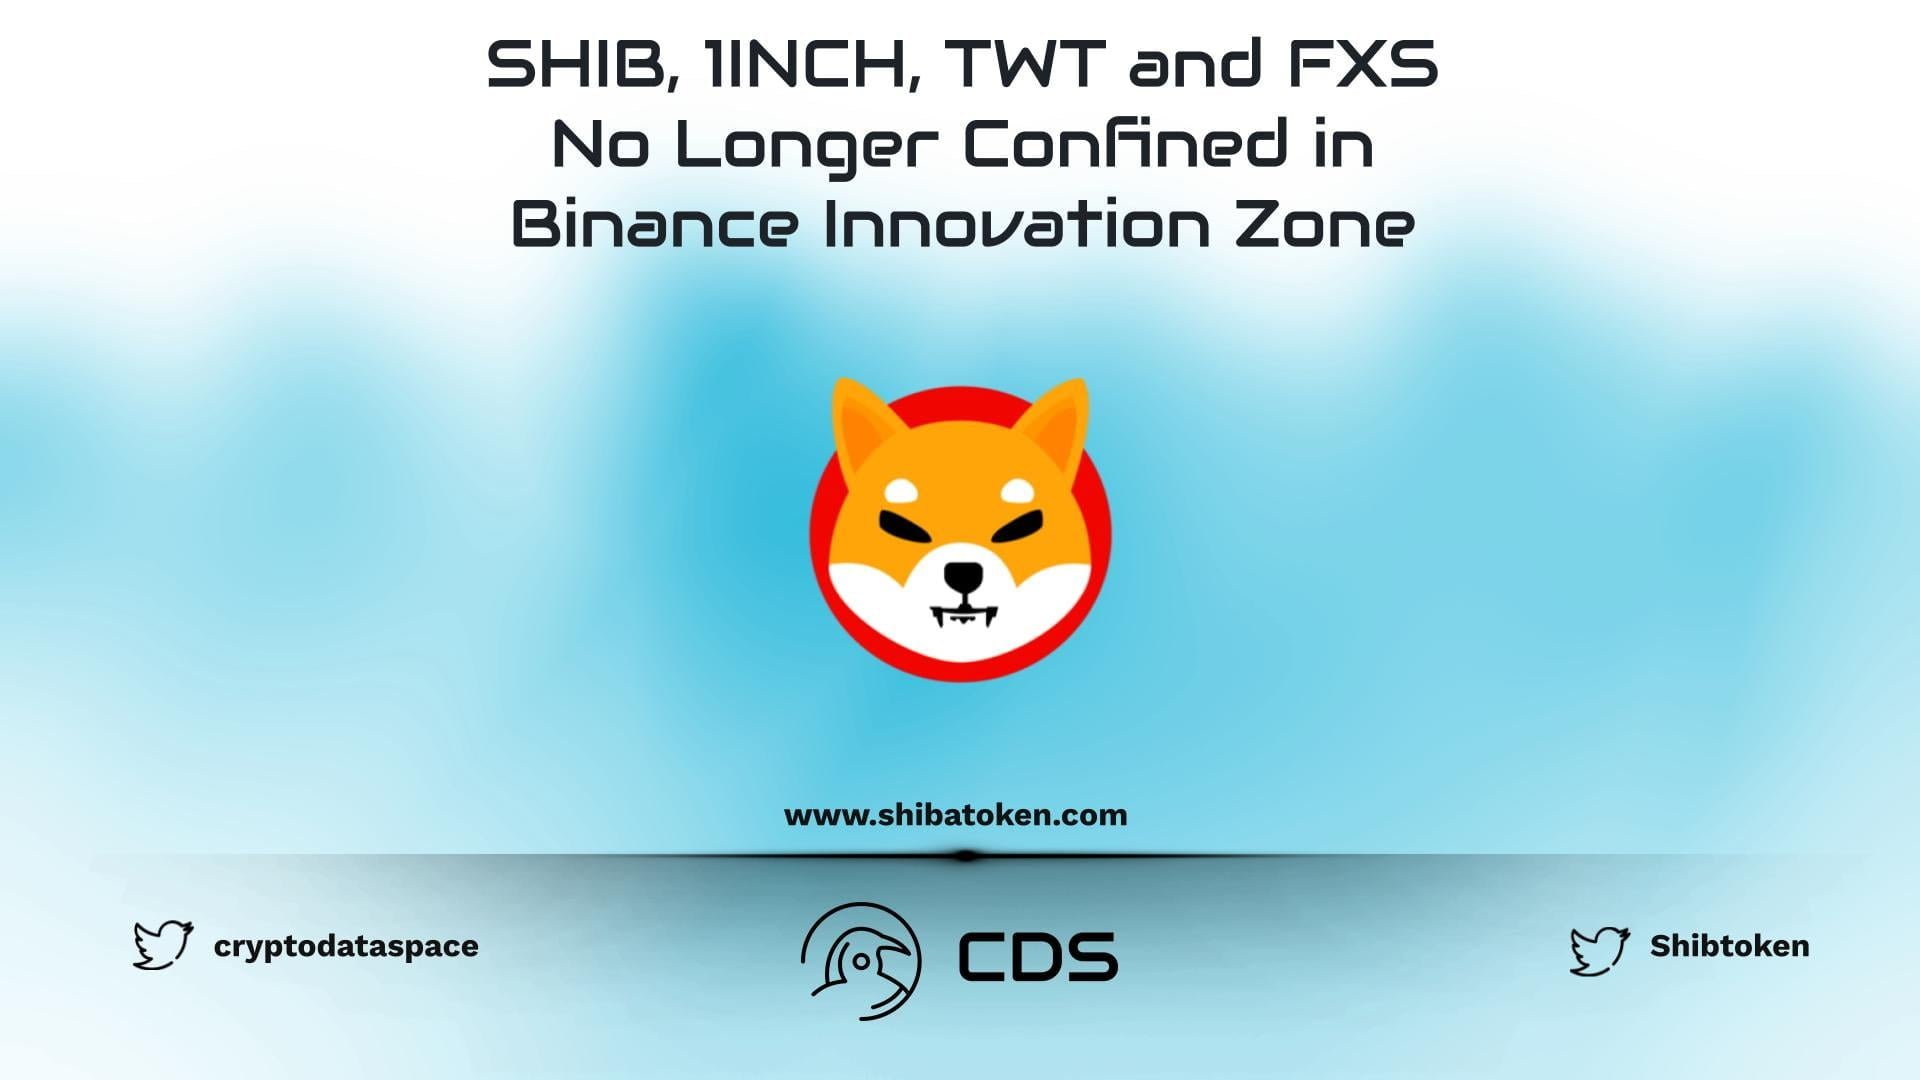 SHIB, 1INCH, TWT and FXS No Longer Confined in Binance Innovation Zone